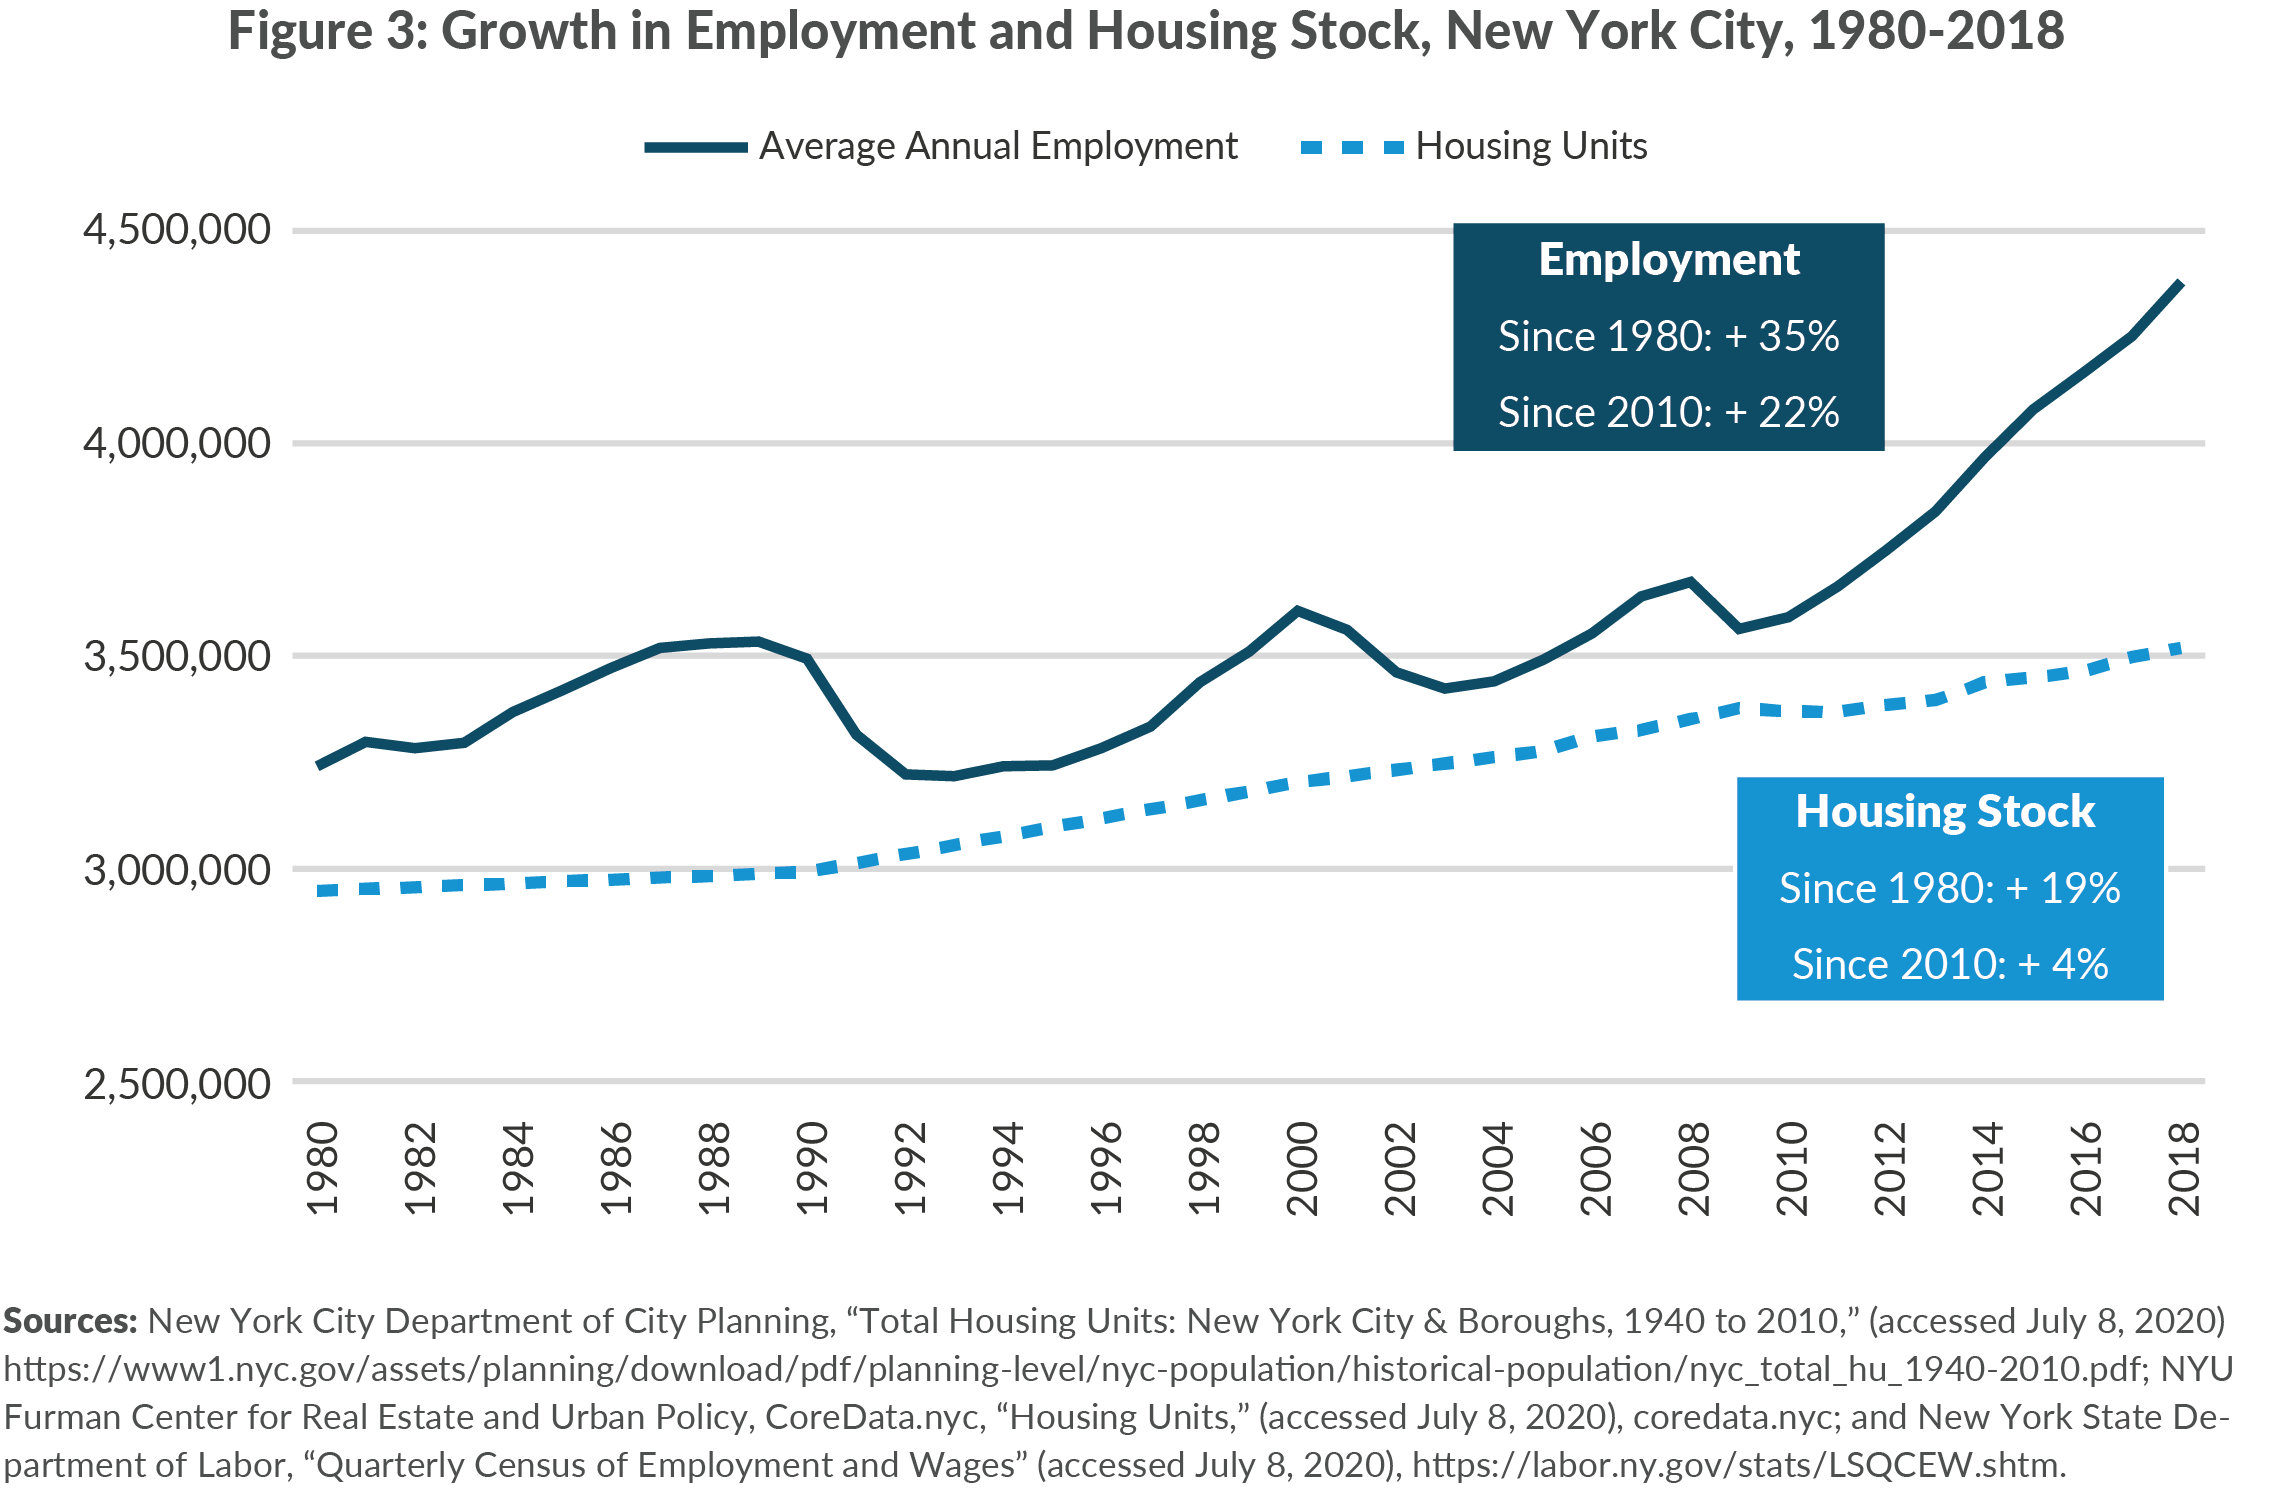 Figure 3. Growth in Employment and Housing Stock, New York City, 1980-2018